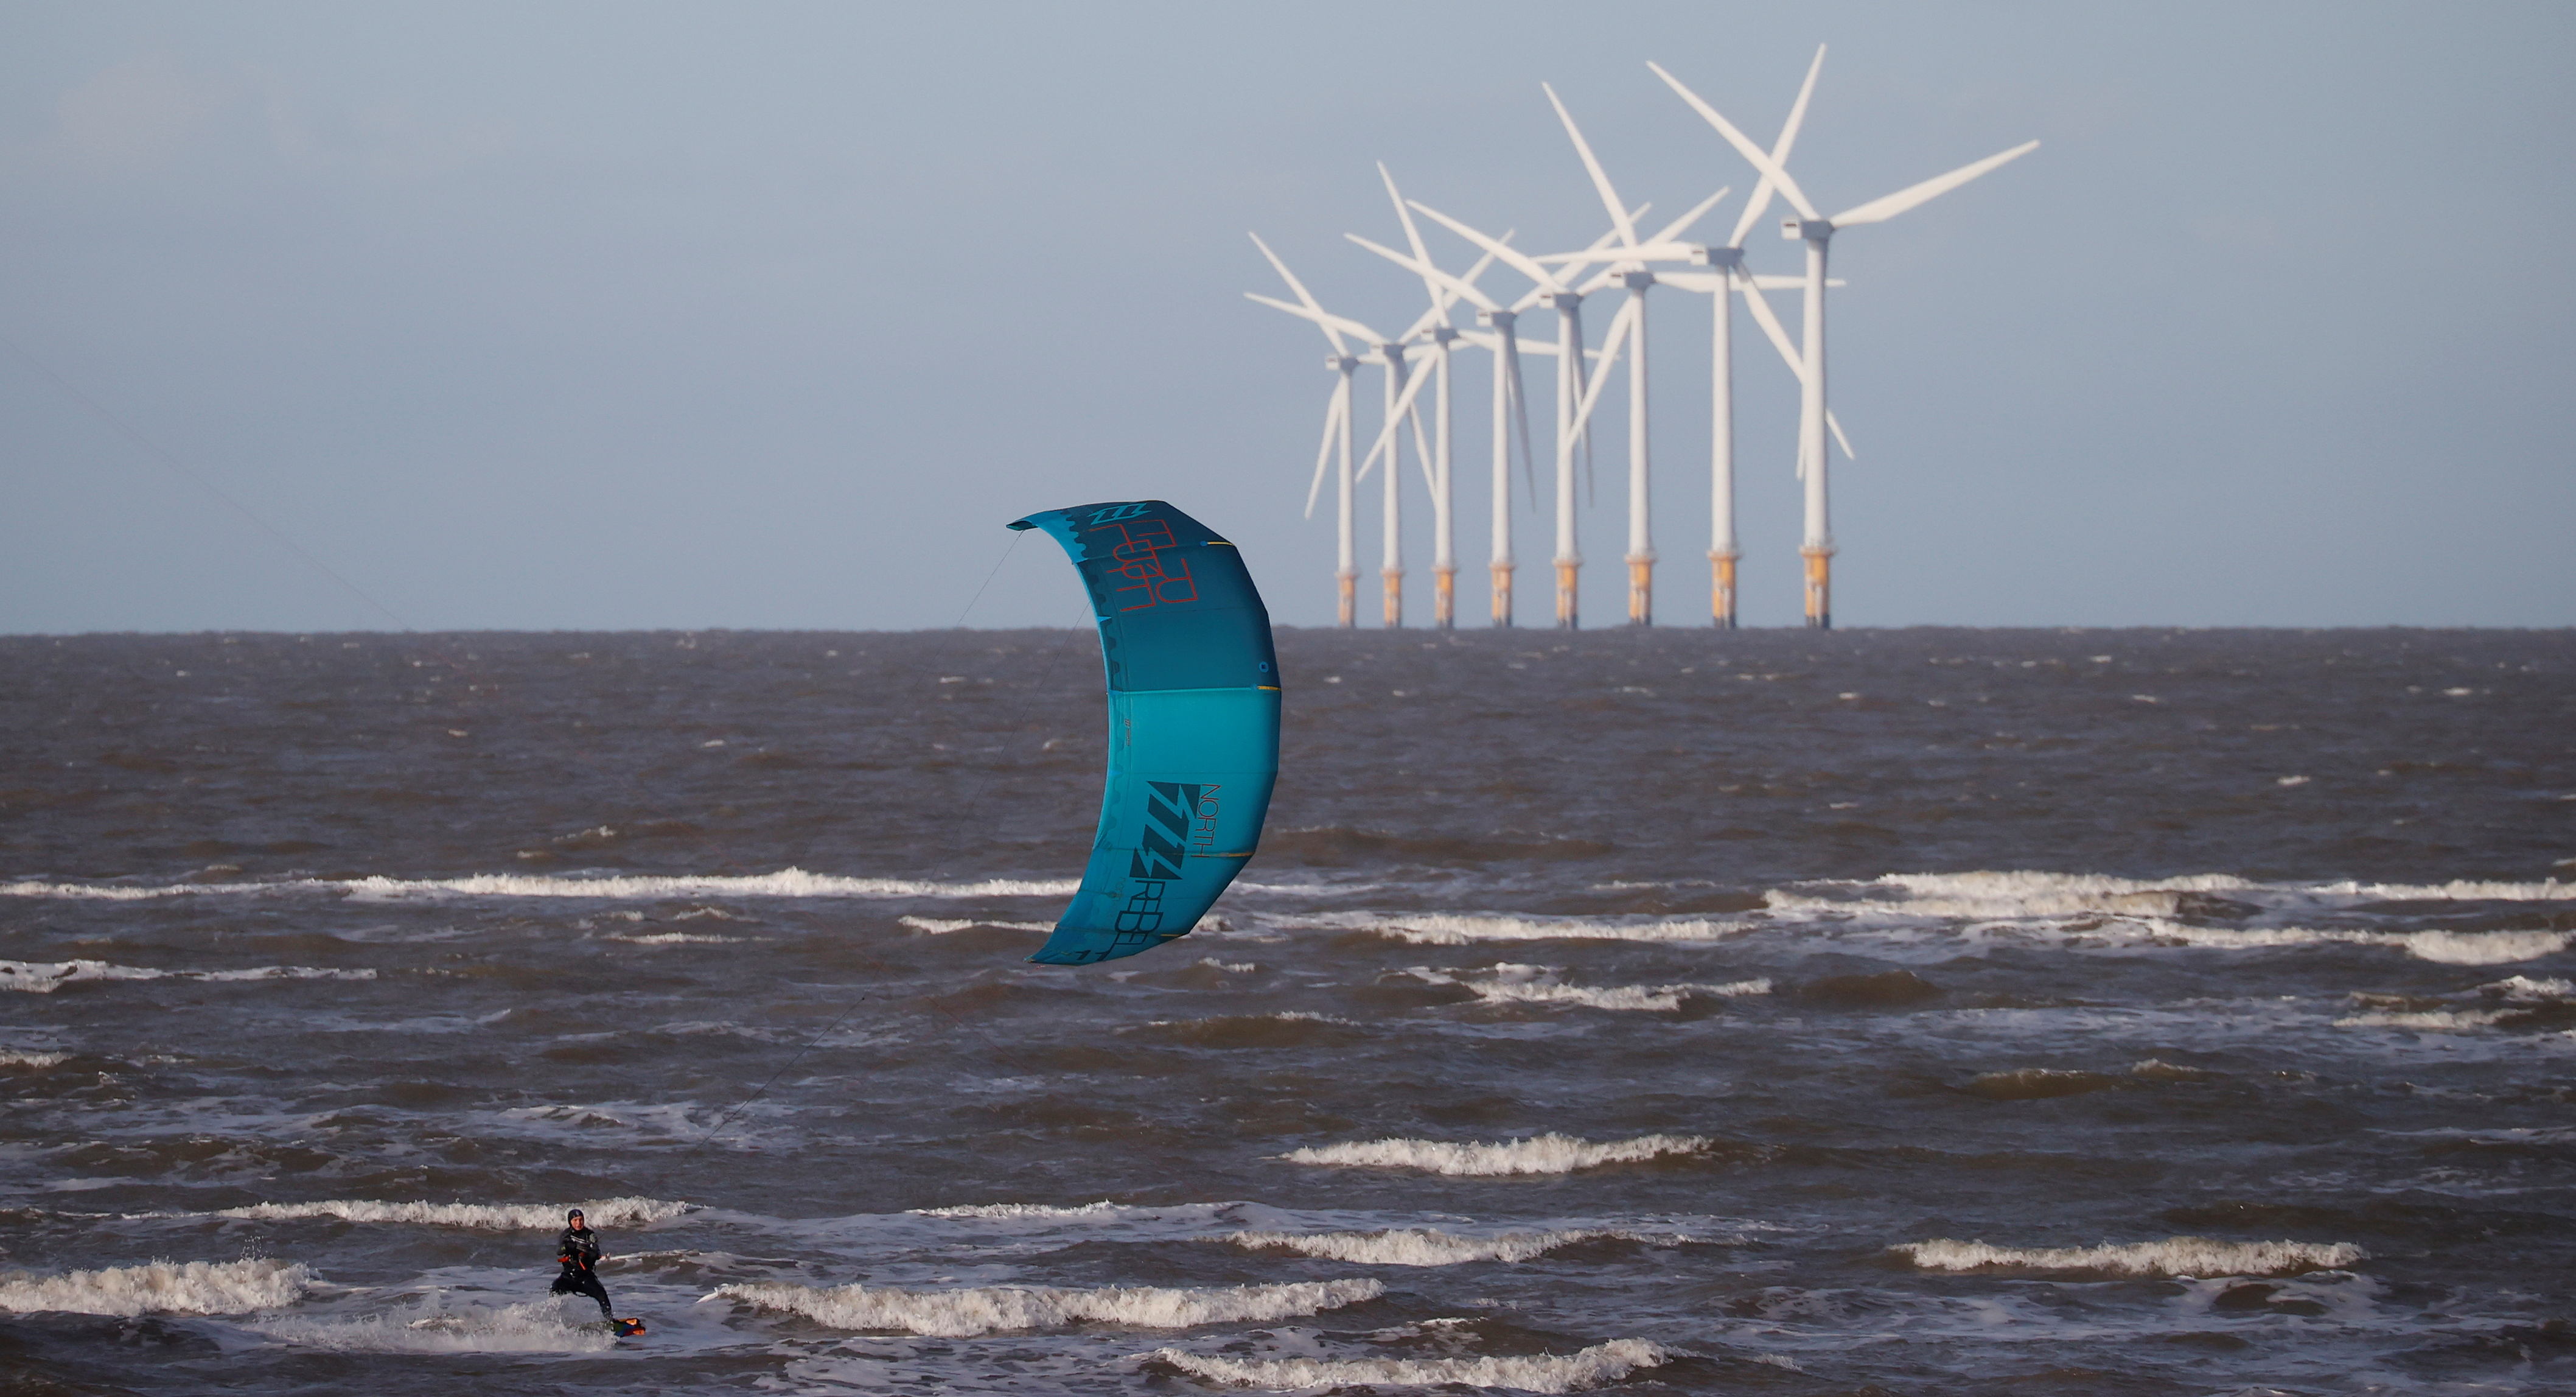 A kitesurfer rides the waves in front of the Burbo Bank offshore wind farm near Wallasey